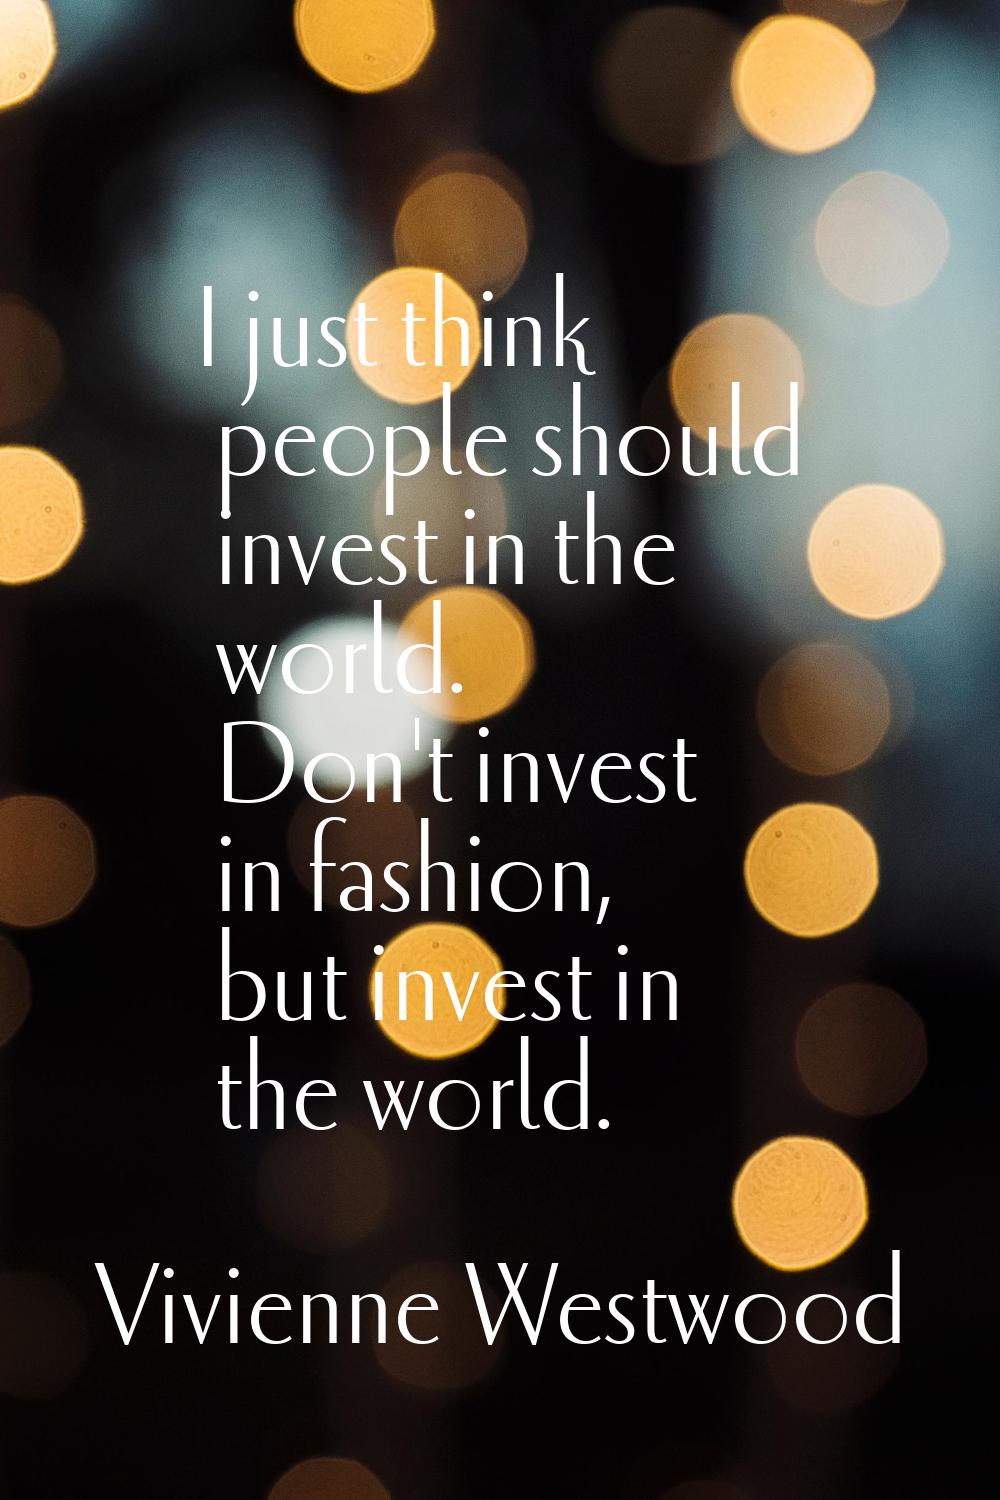 I just think people should invest in the world. Don't invest in fashion, but invest in the world.